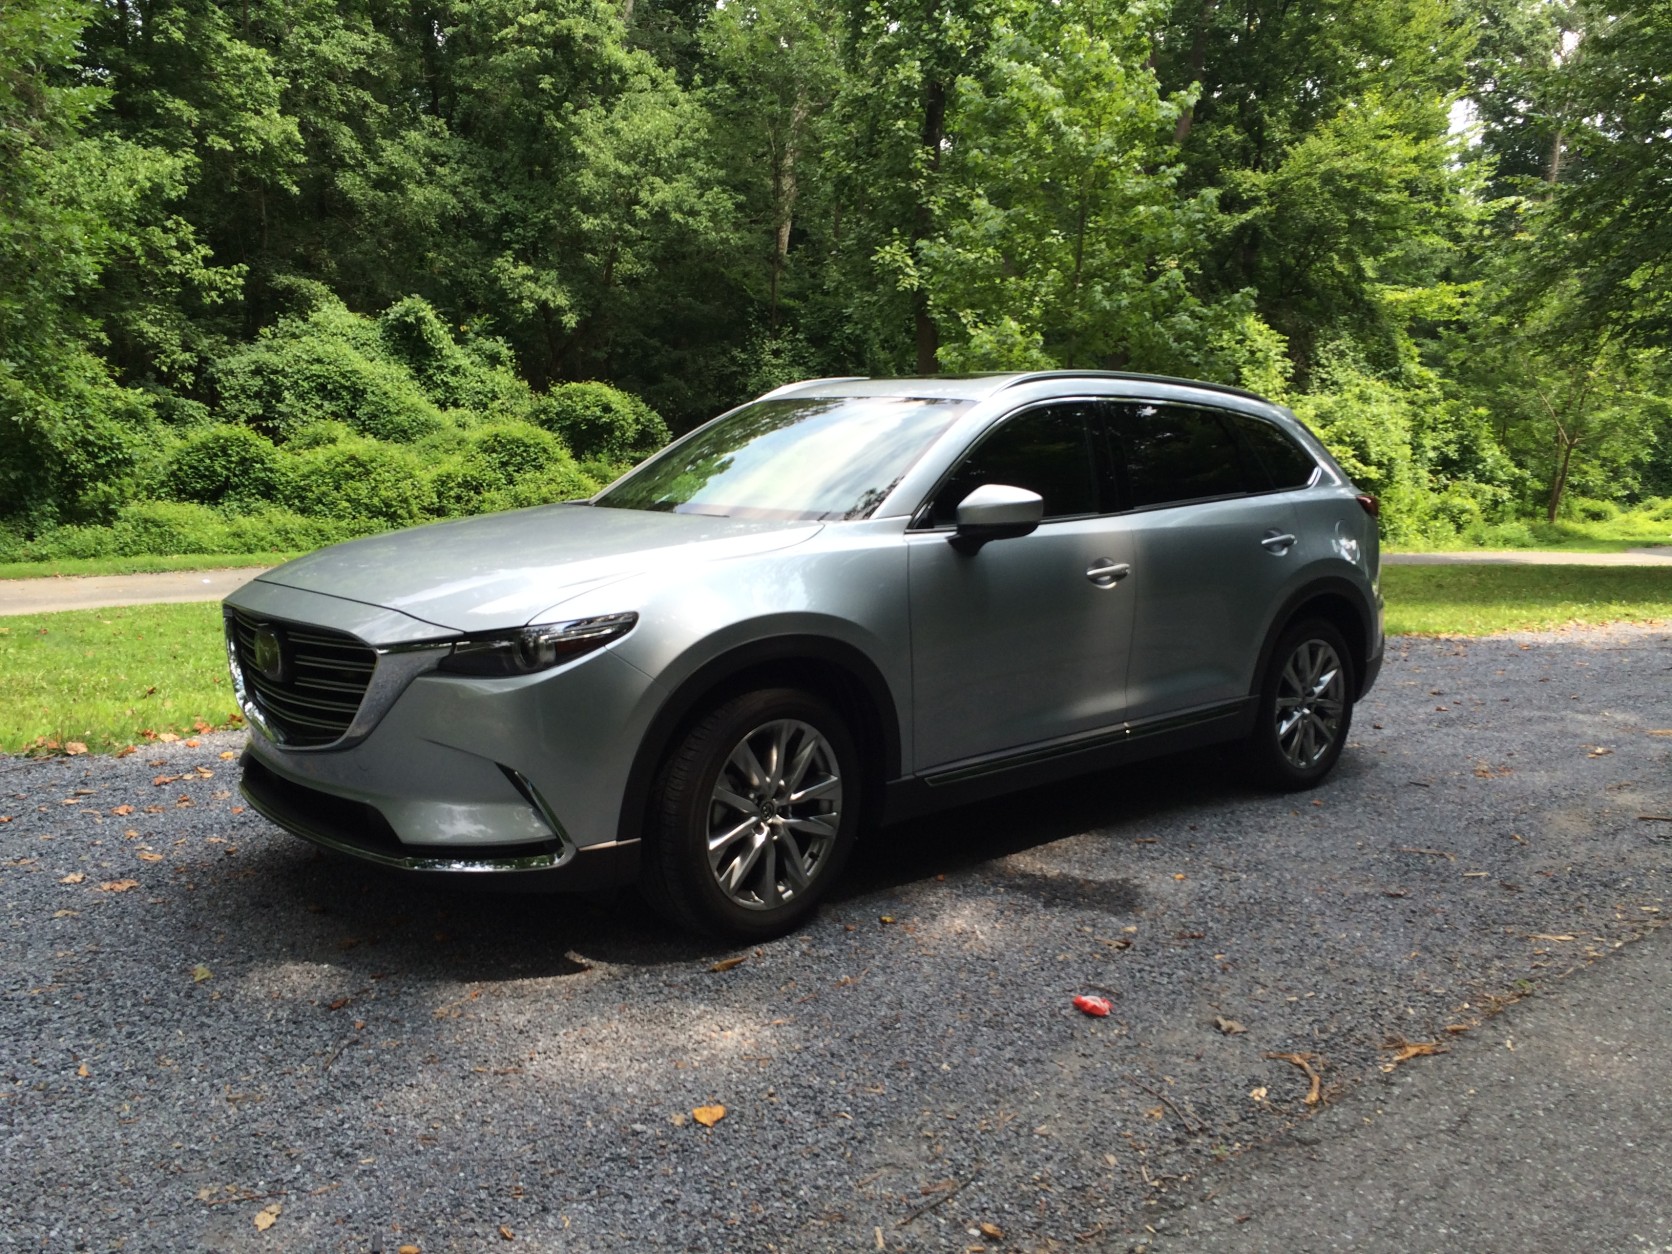 redesigned-mazda-cx-9-makes-the-7-seat-crossover-look-good-wtop-news